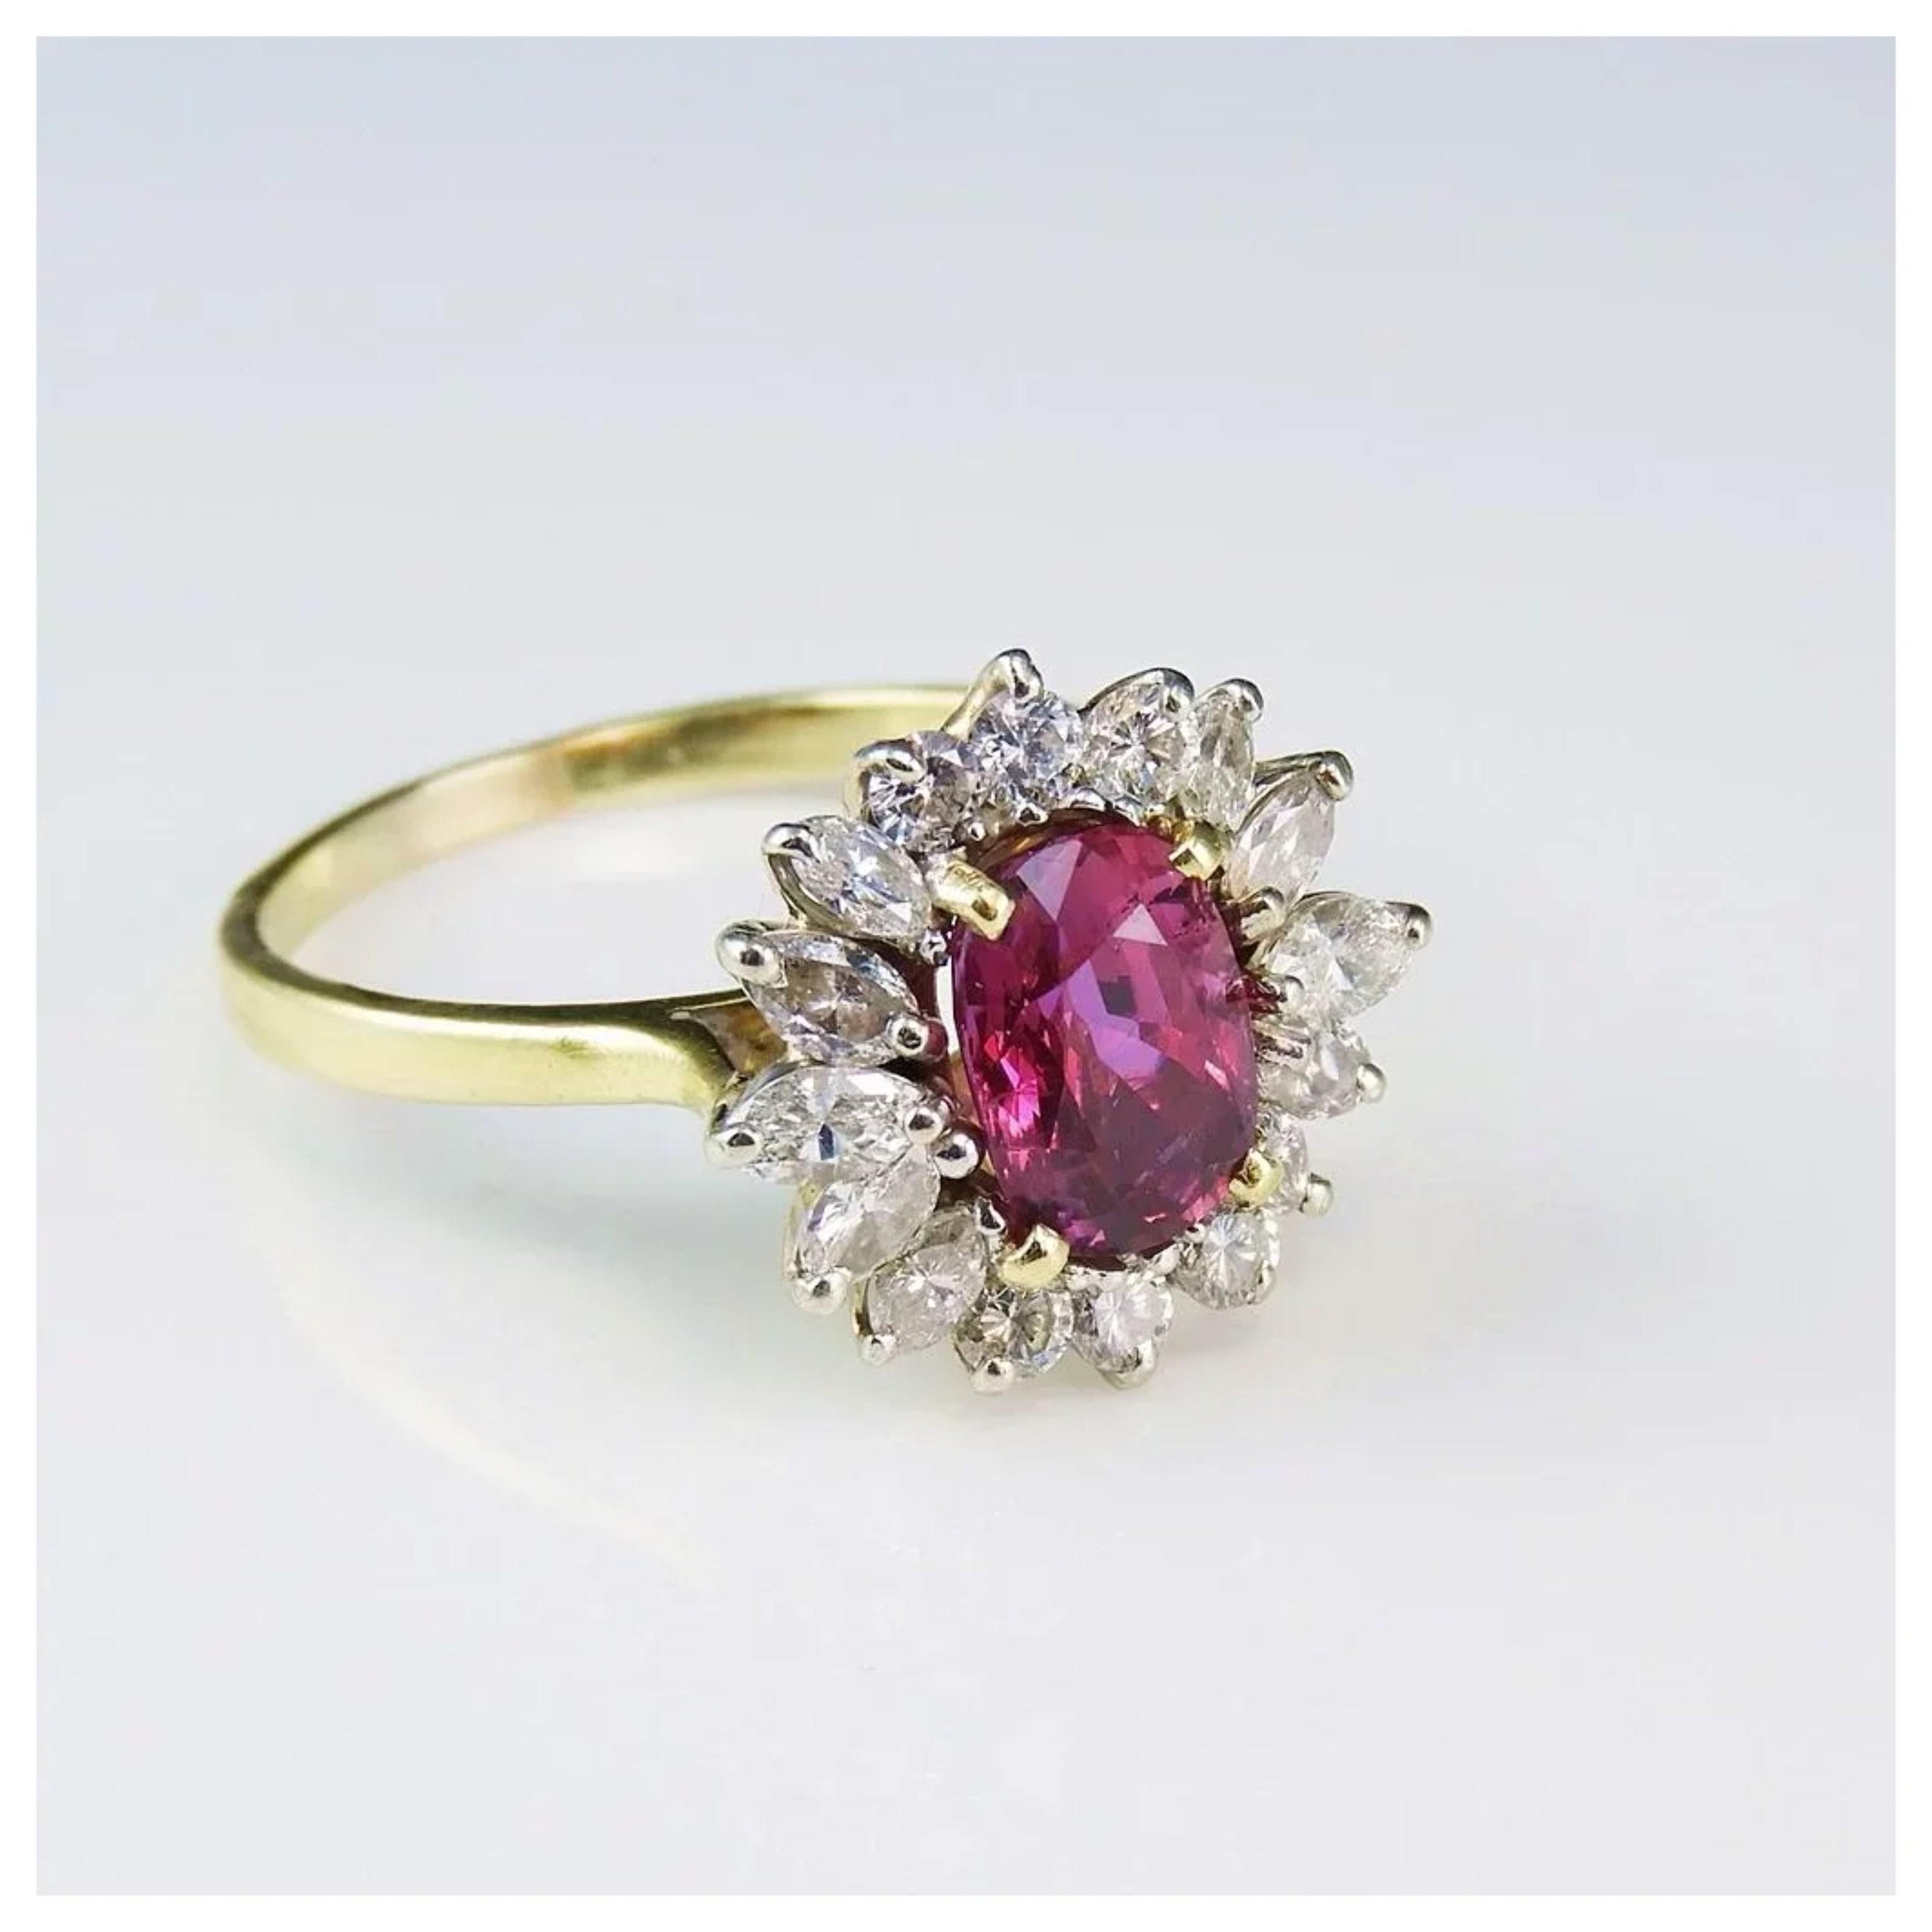 For Sale:  3.6 Carat Floral Ruby Diamond Engagement Ring Art Deco Ruby Diamond Wedding Ring 2